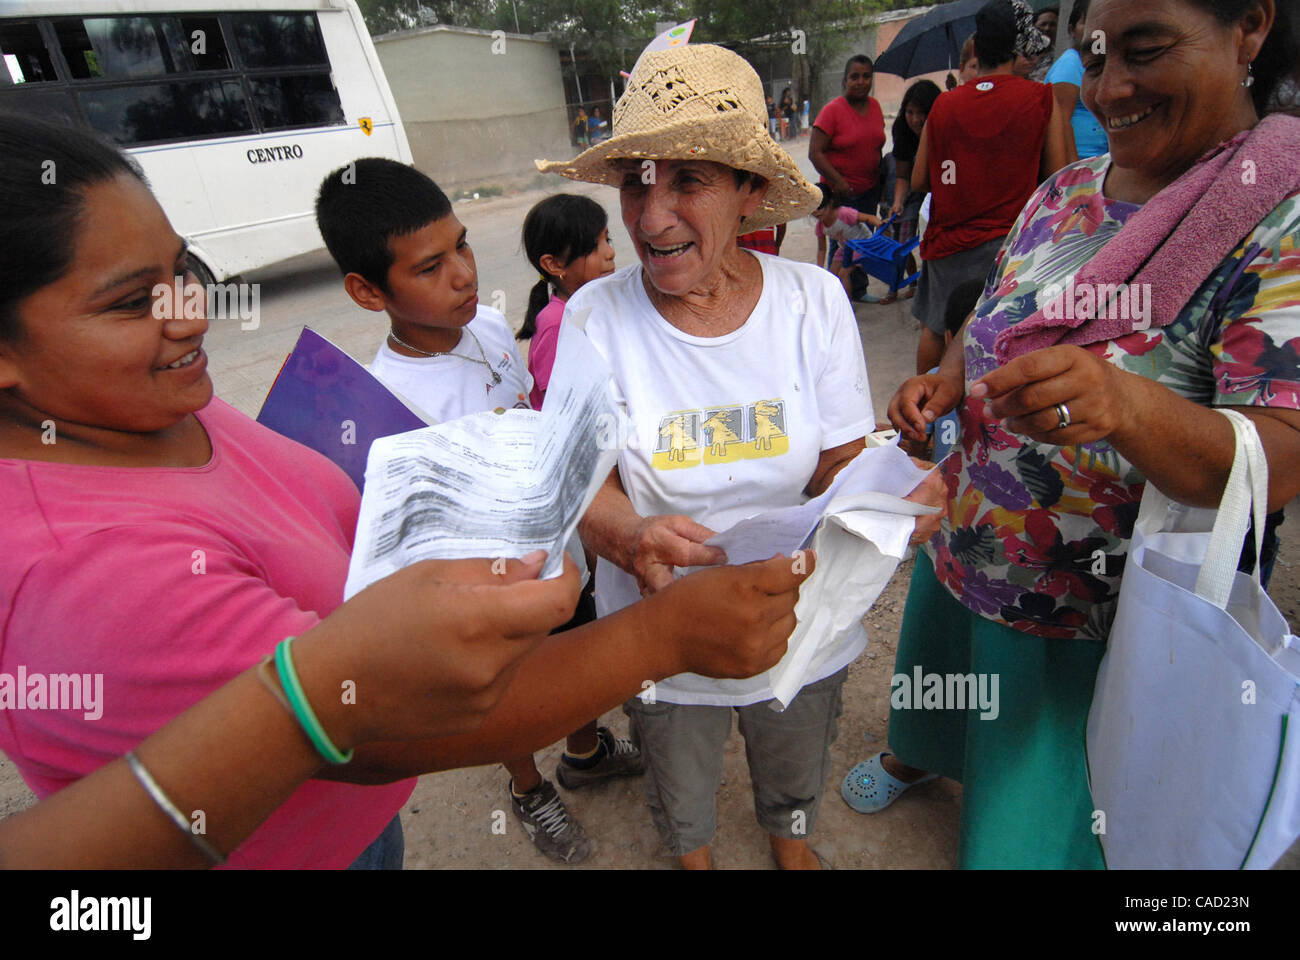 Aug 12, 2010 - Reynosa, Mexico - As she checks the line of residents that have gathered in the Colonia of Satelite Uno, DIANNE HURMAN is surrounded by smiling mothers giving her copies of birth certificates of their children, so that those children will recieve birthday cakes at the end of the day f Stock Photo